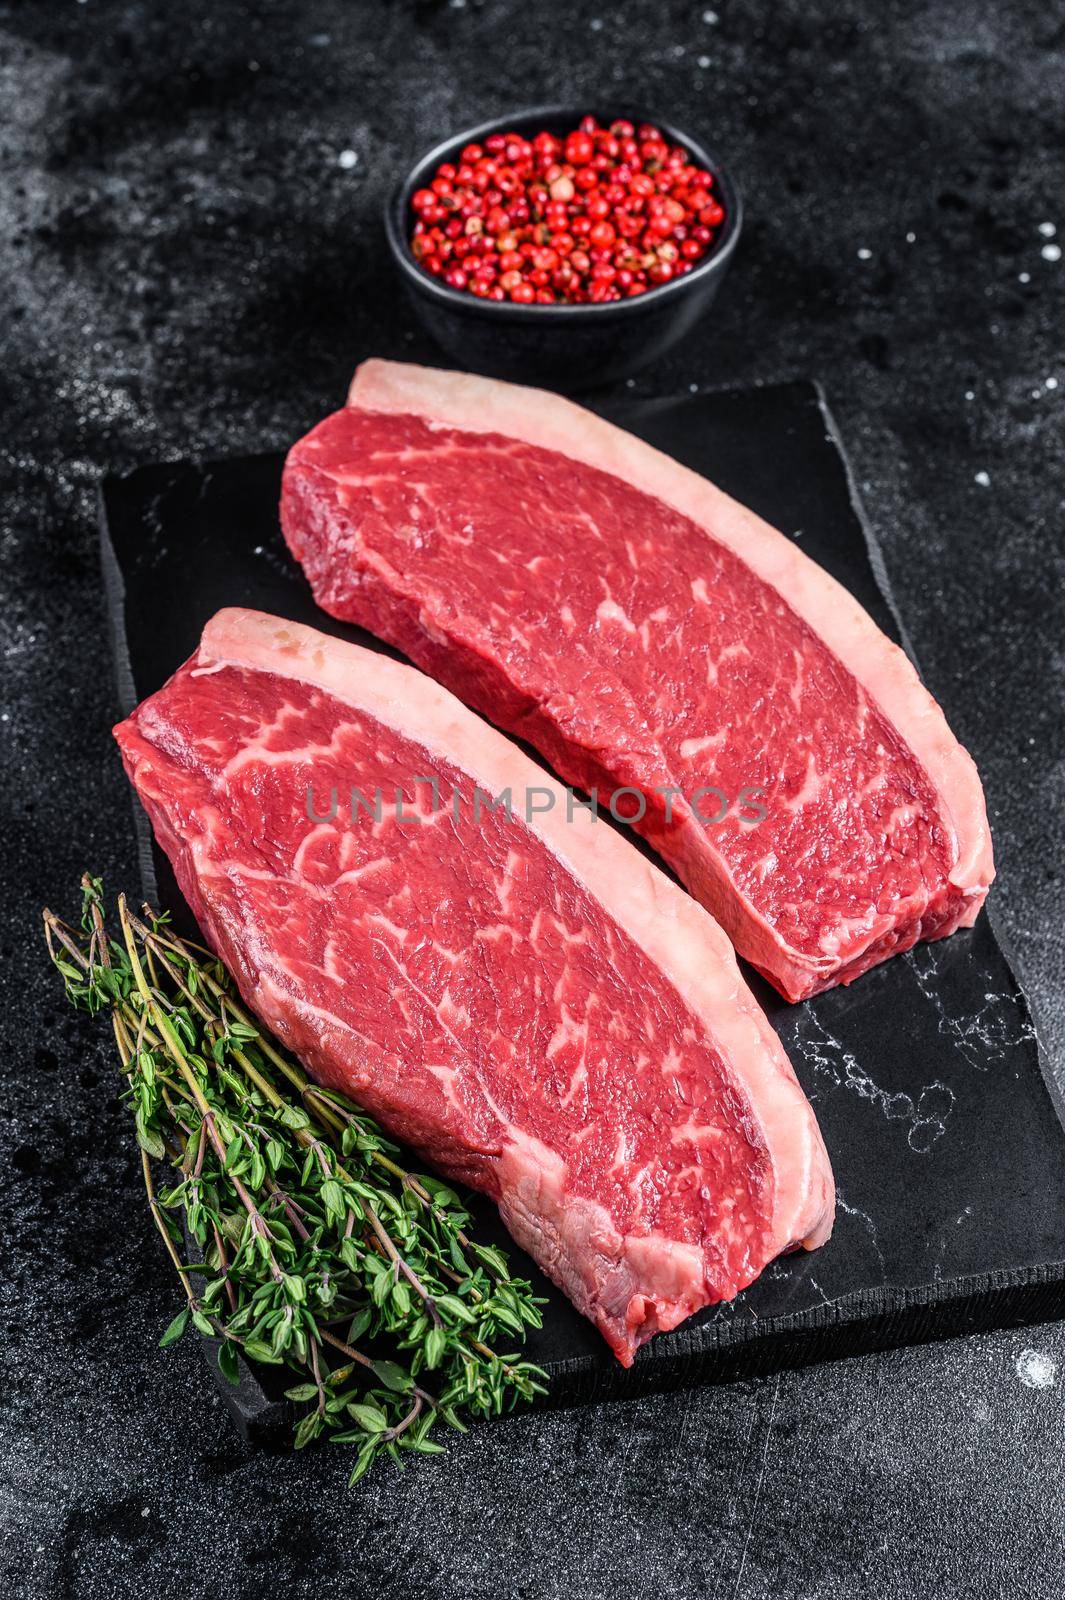 Raw cap rump steak or top sirloin beef meat steak on marble board. Black background. Top view by Composter